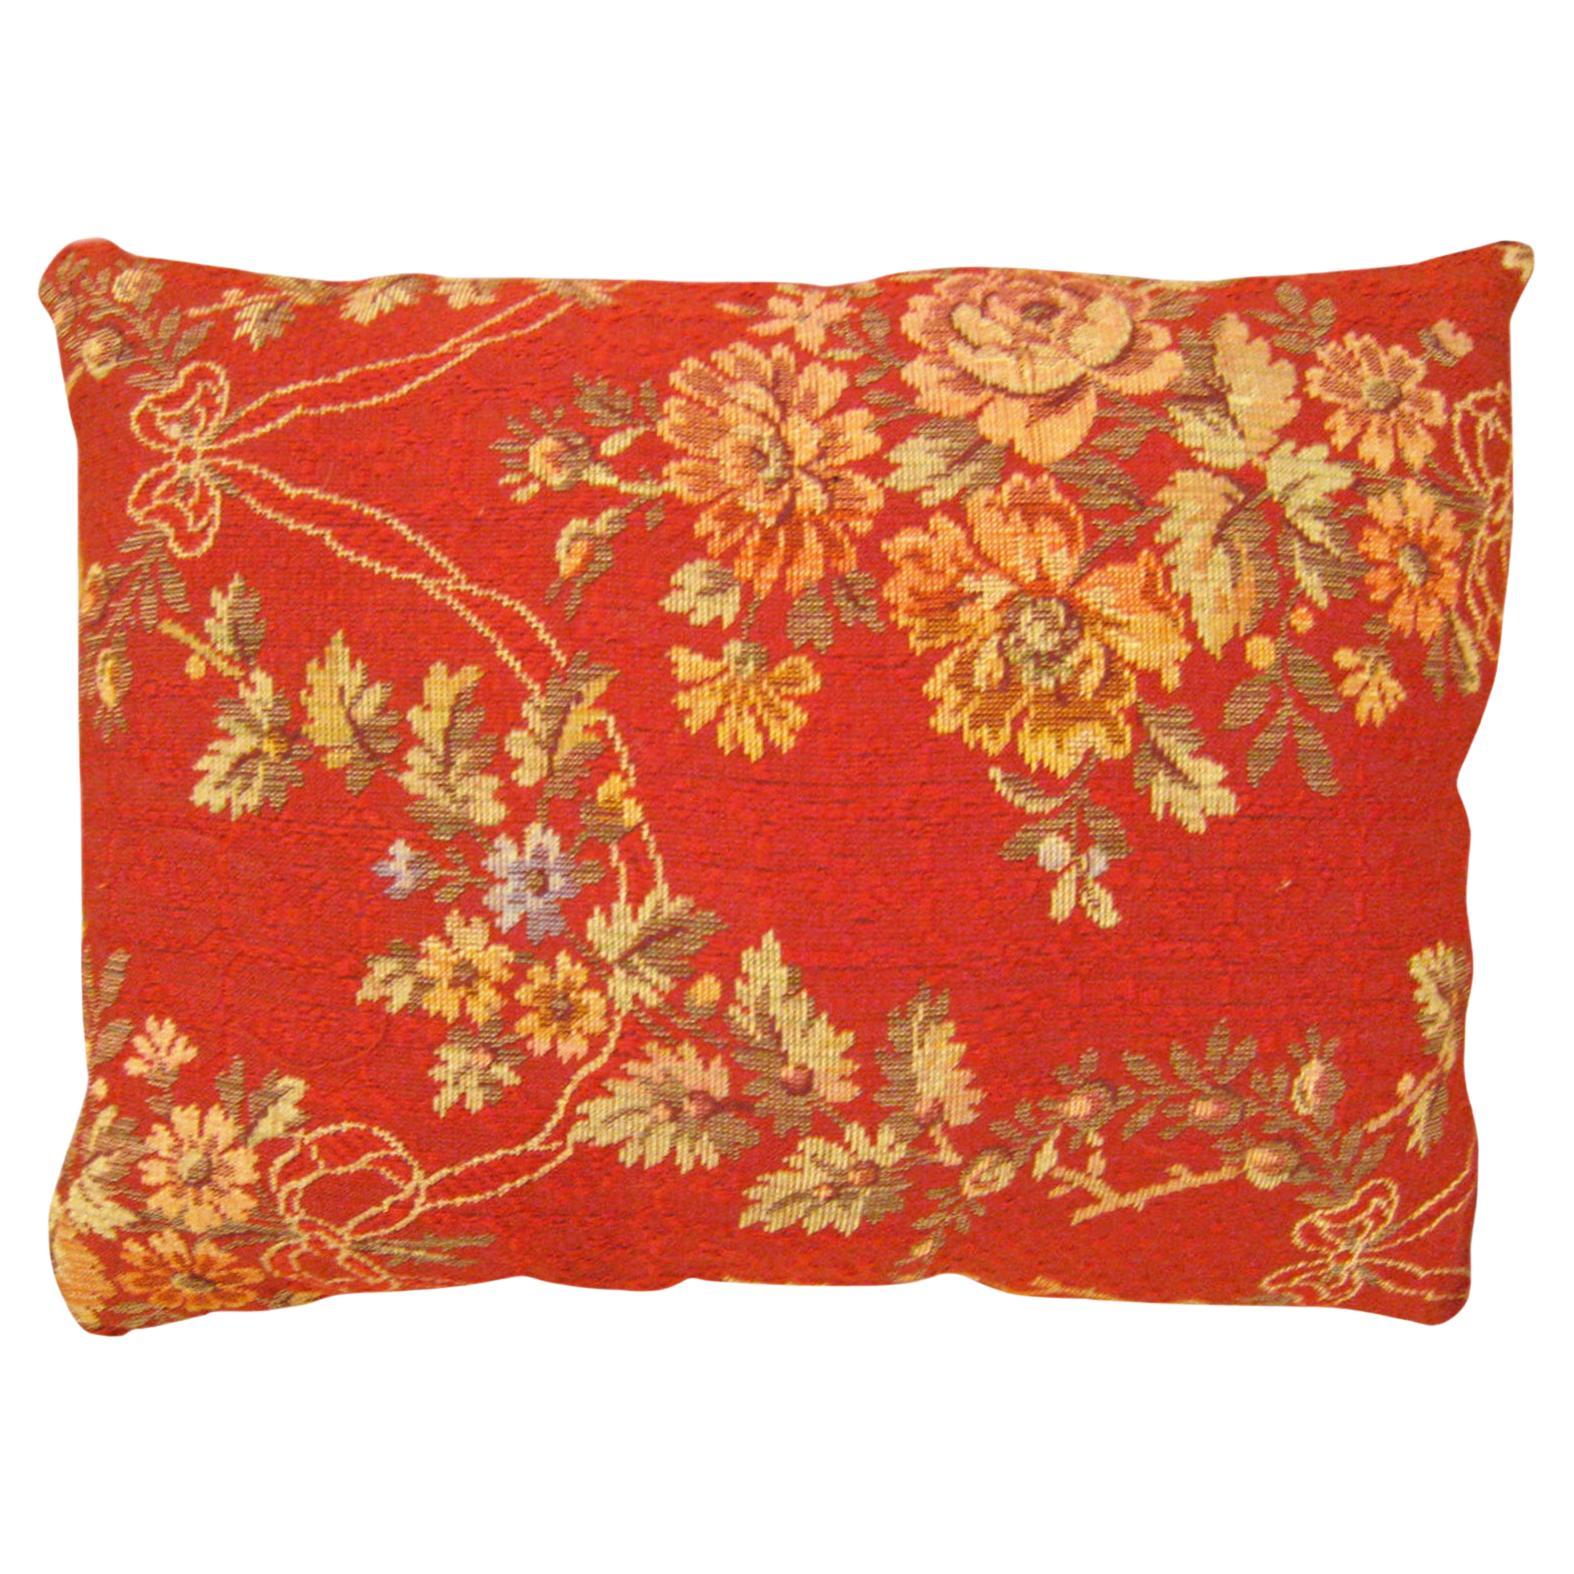 Decorative Antique French Jacquard Tapestry Pillow, with Floral Elements Allover For Sale